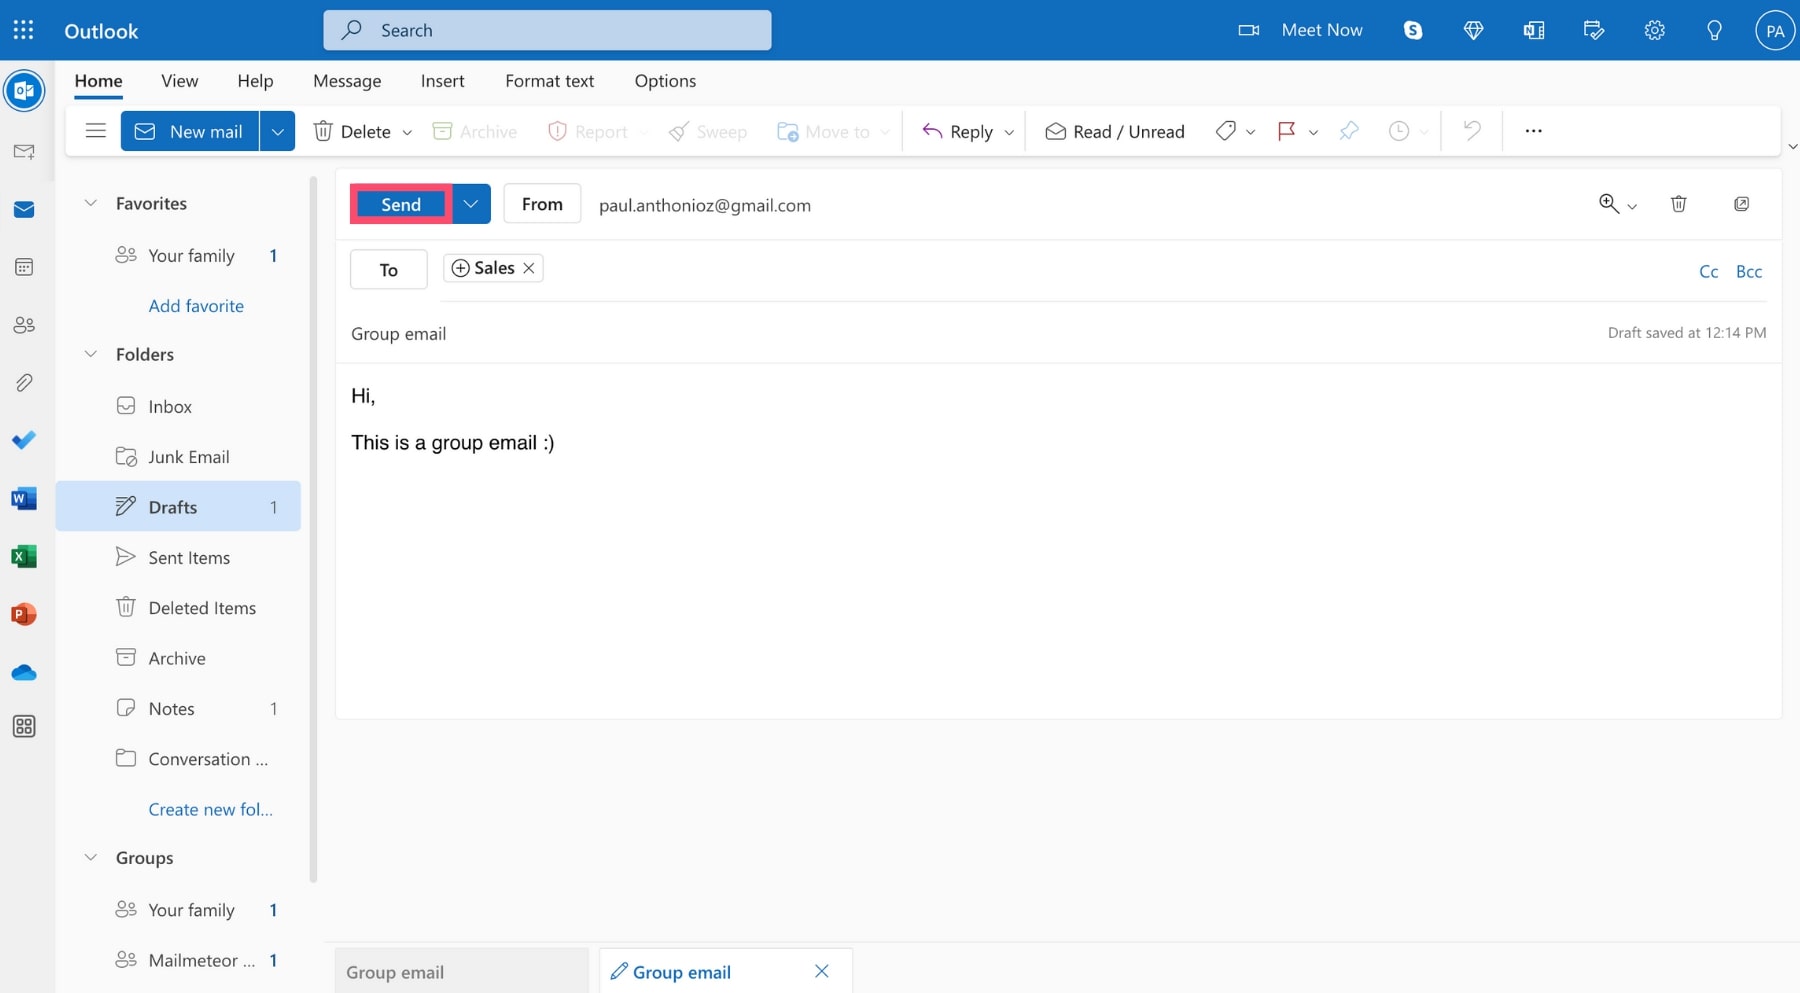 Send an email to your contact list in Outlook